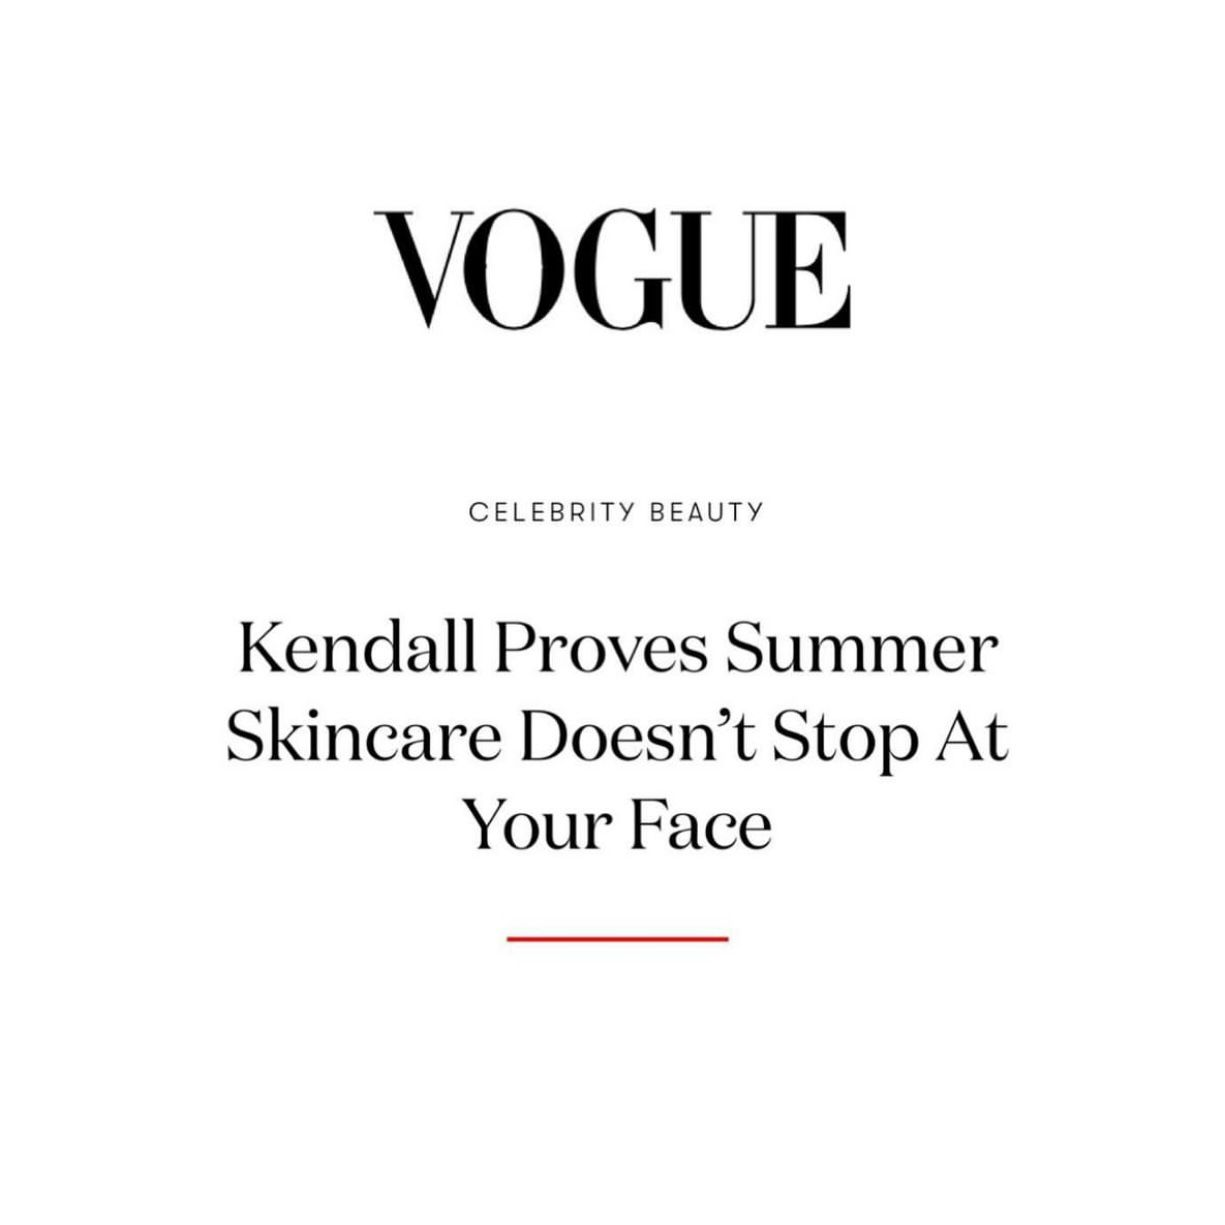 Shane Cooper in Vogue article "Kendall Proves Summer Skincare Doesn’t Stop At Your Face "